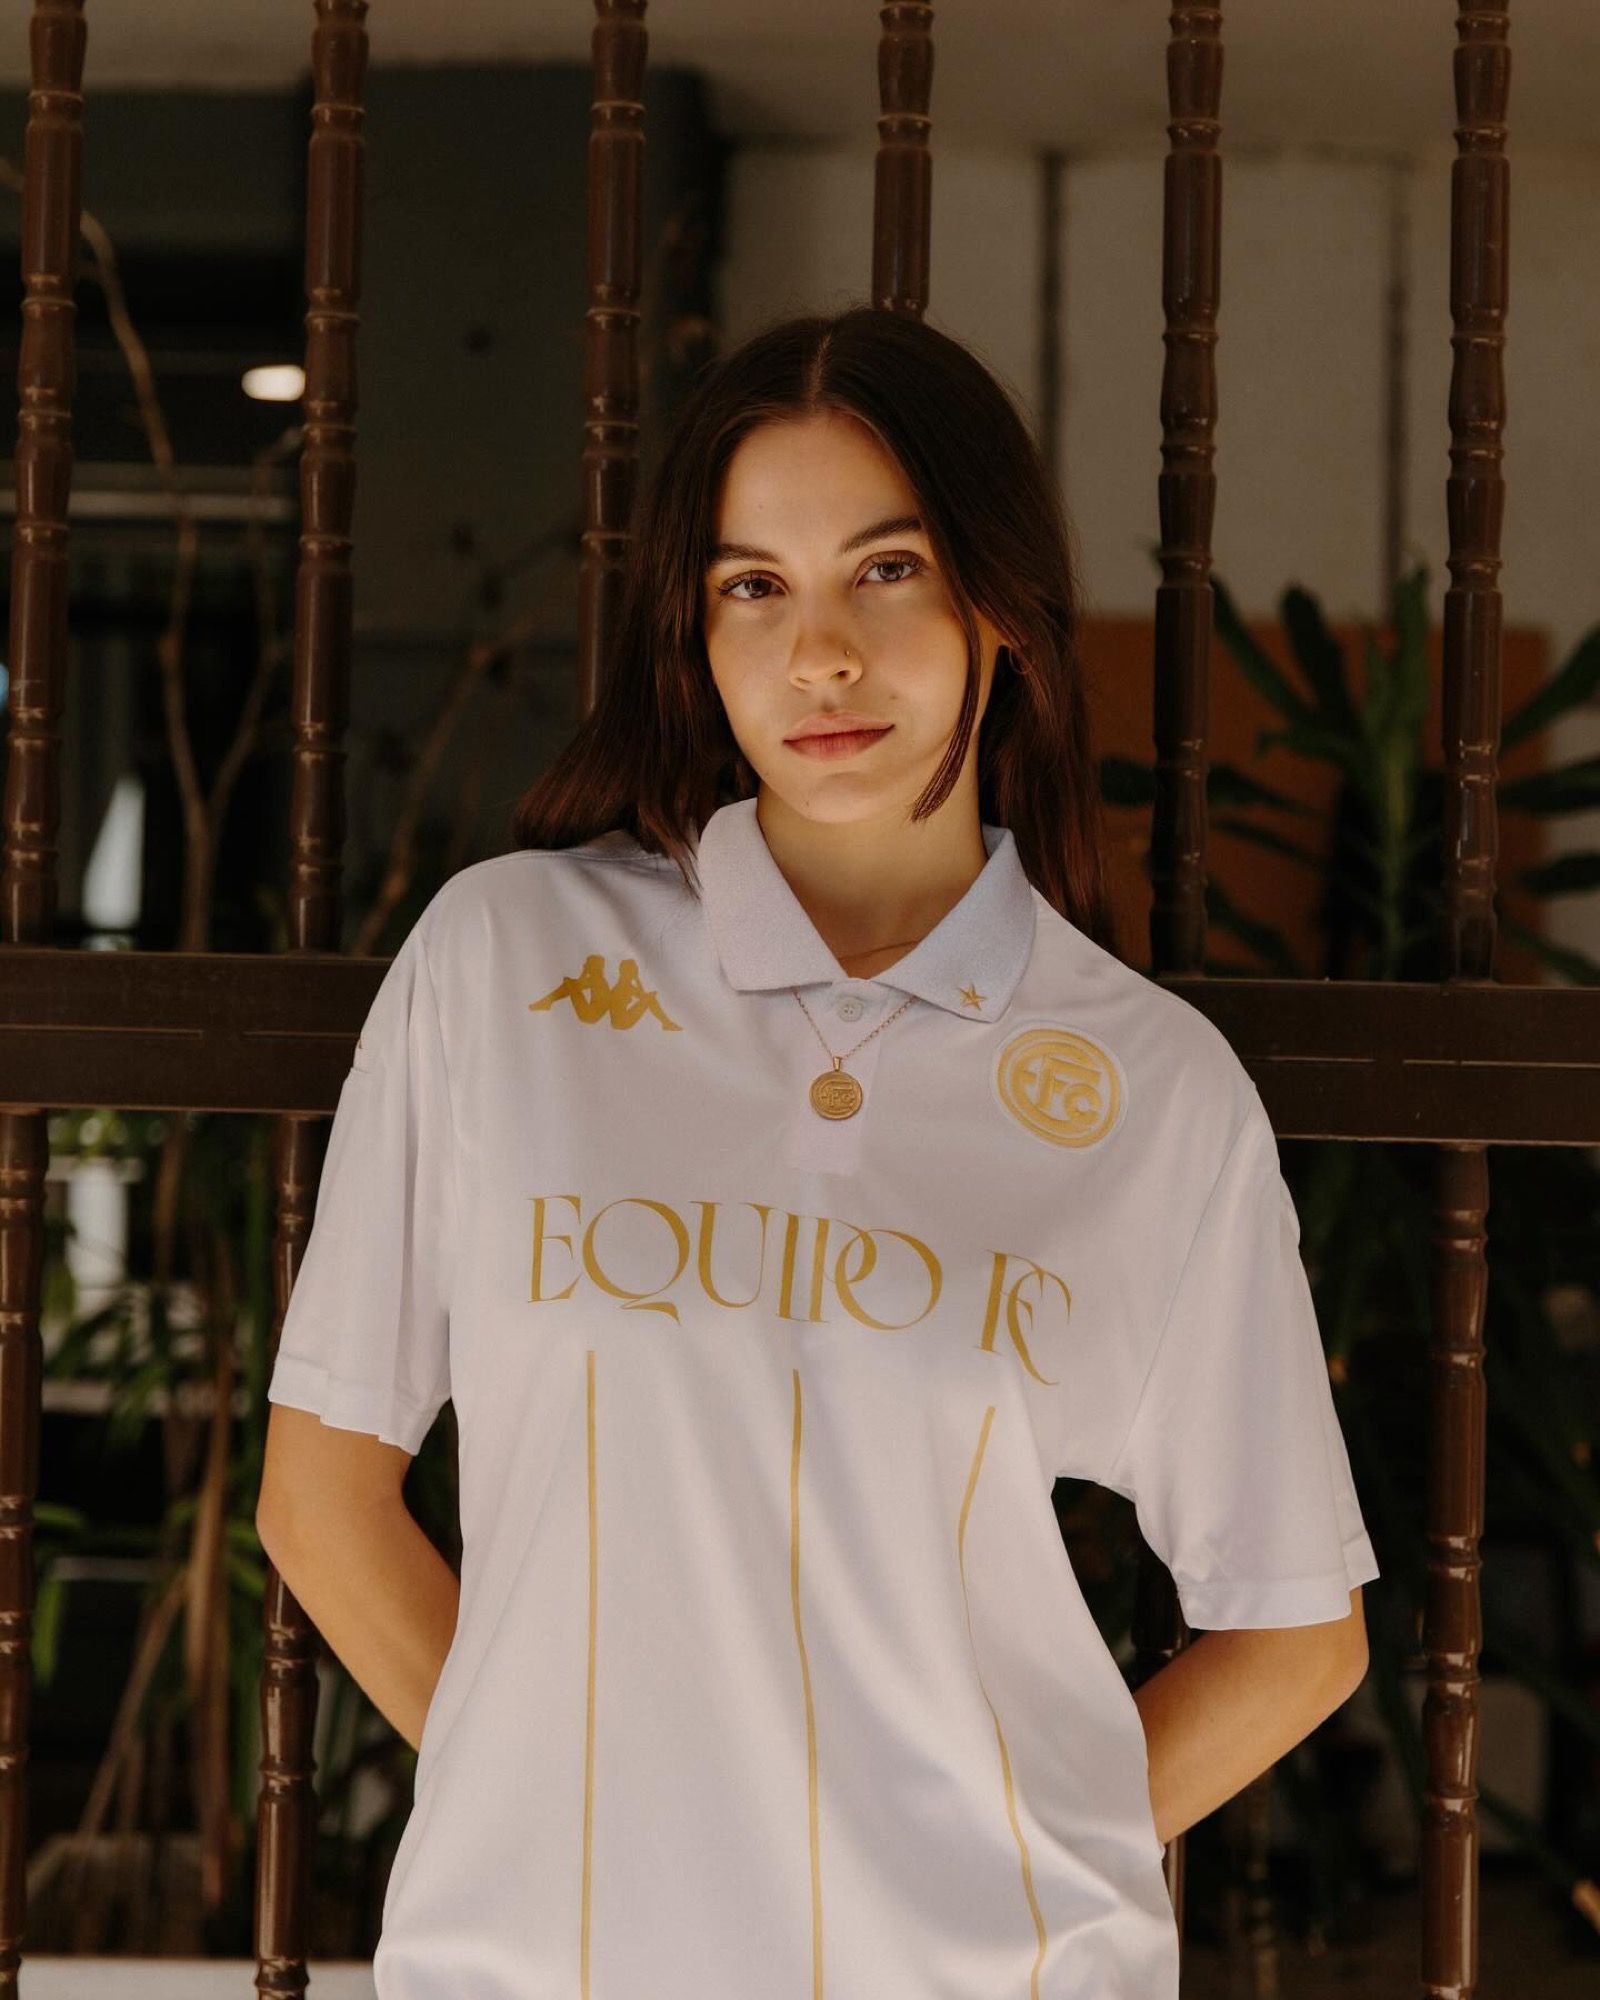 Equipo FC and Kappa dedicate a collection to Italian culture The inspiration comes from the Intercontinental Cup won by AC Milan in 1990